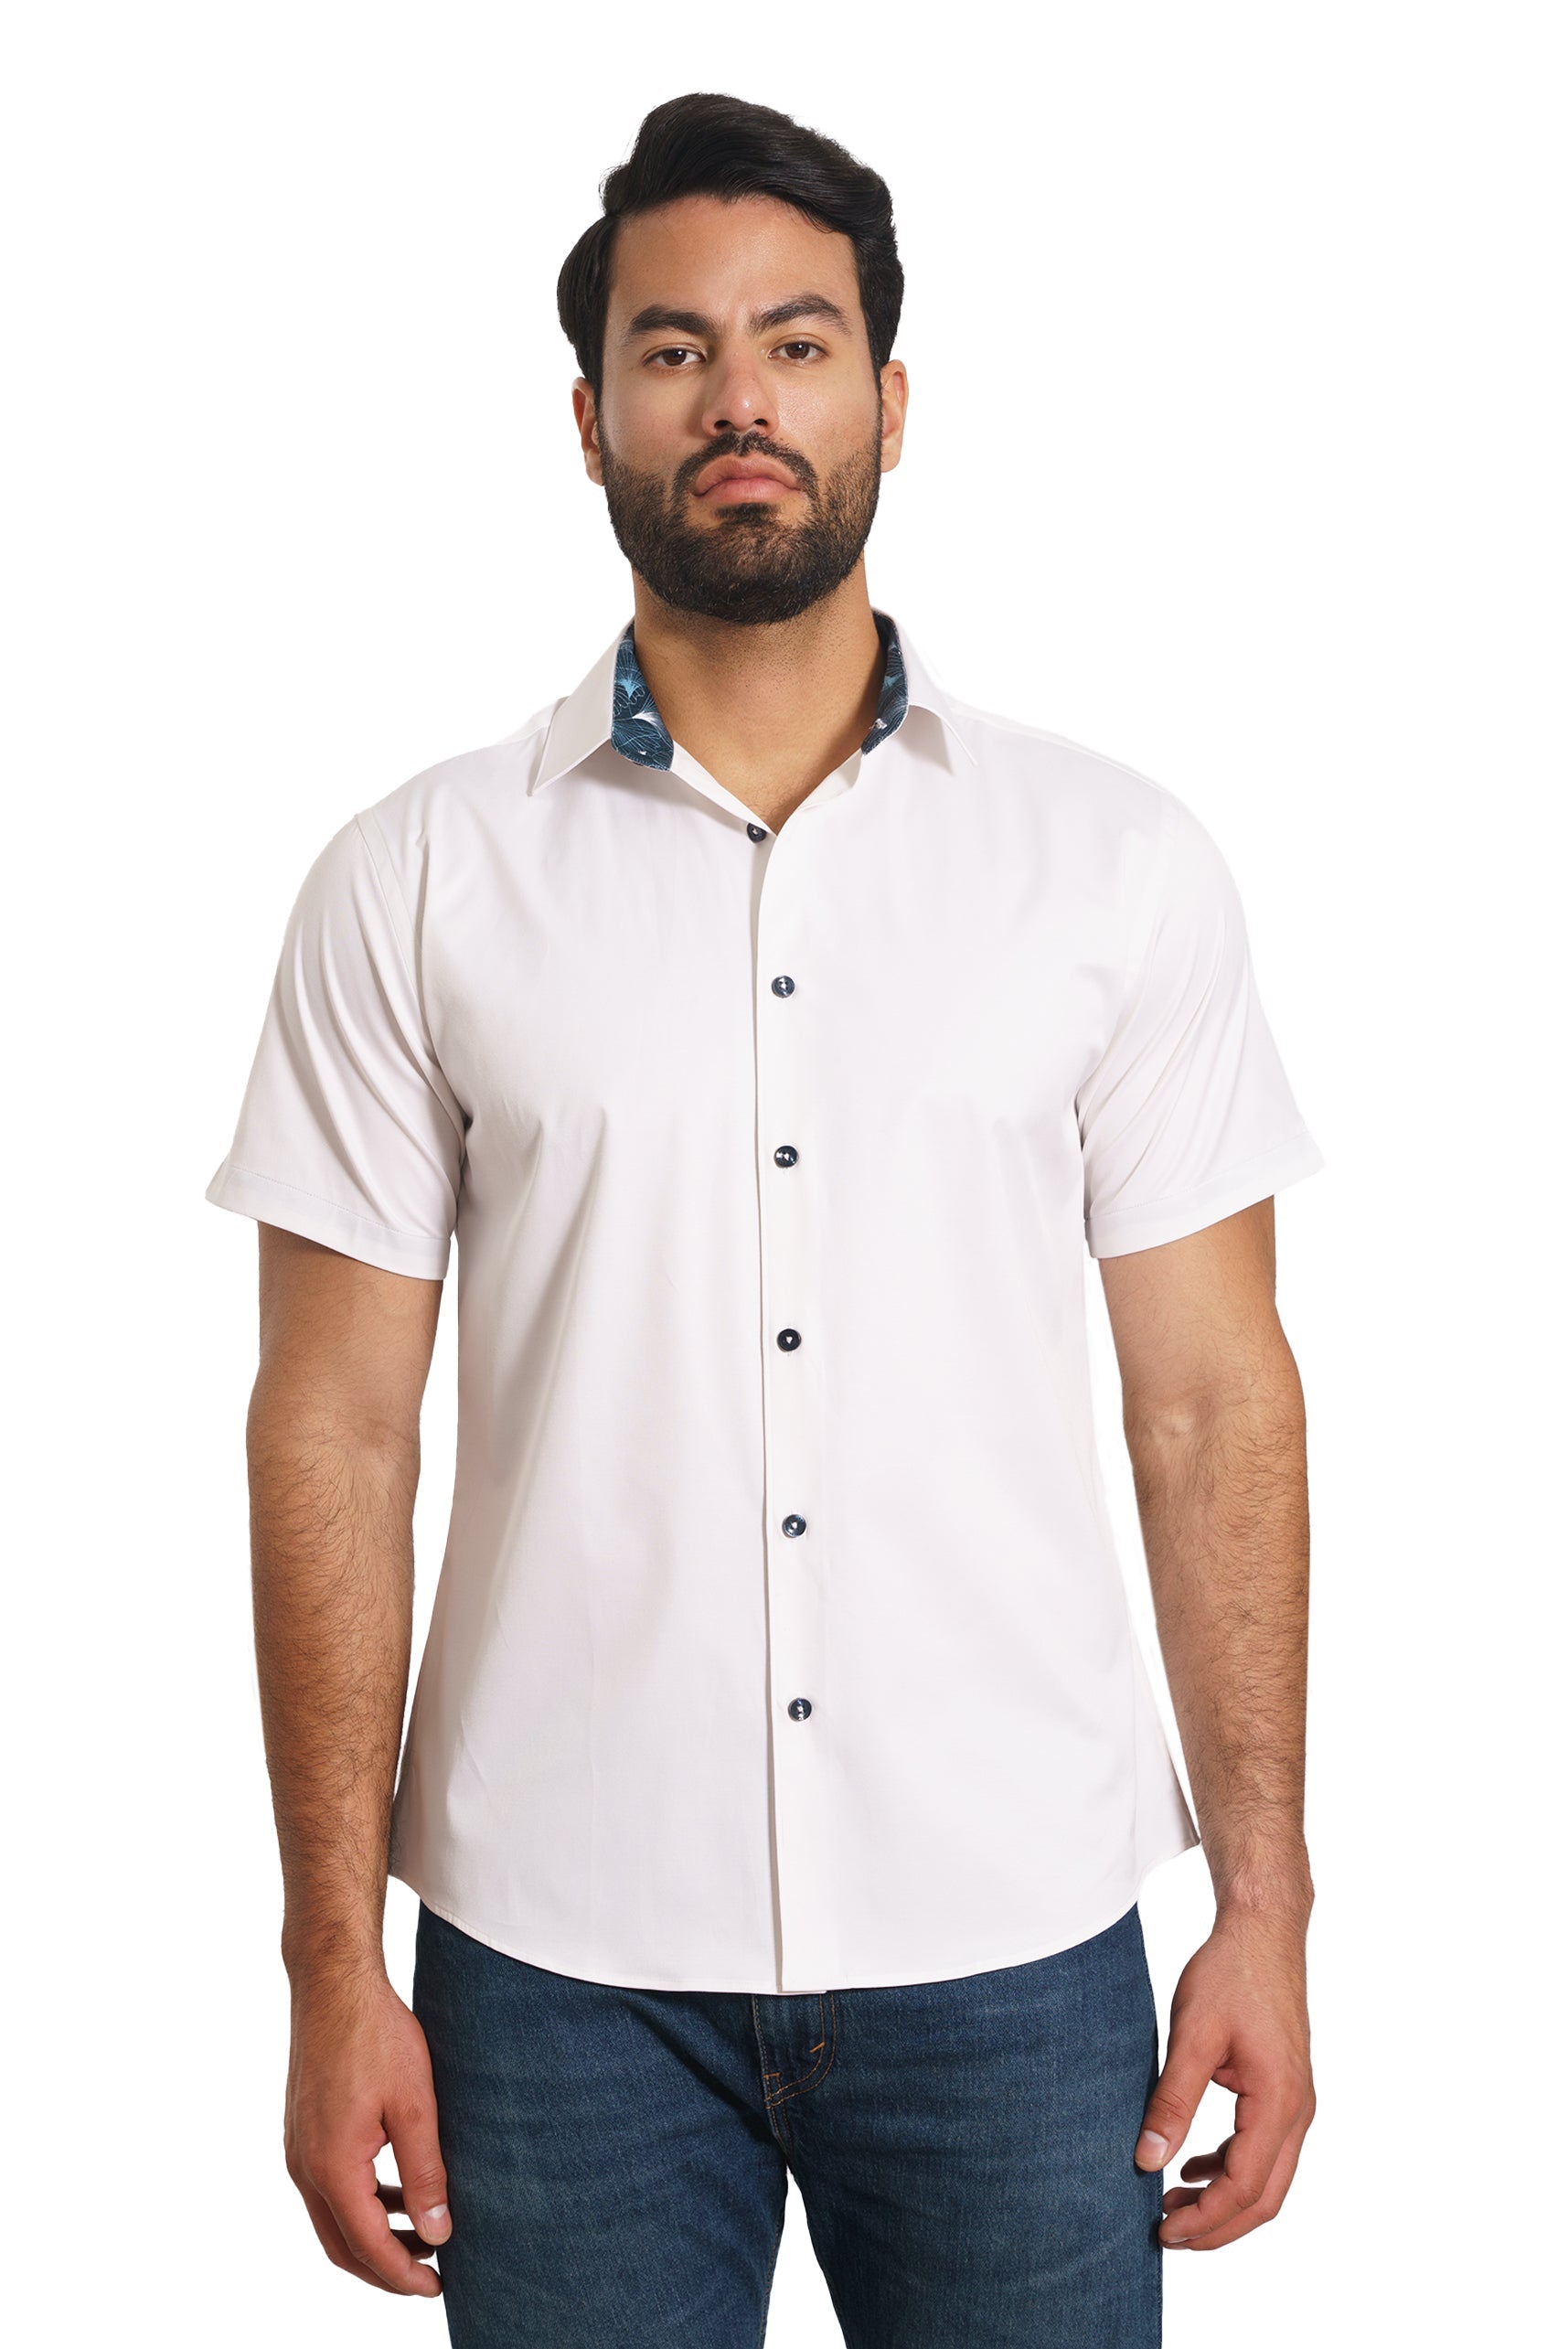 White Short Sleeve Shirt TH-2864SS Front